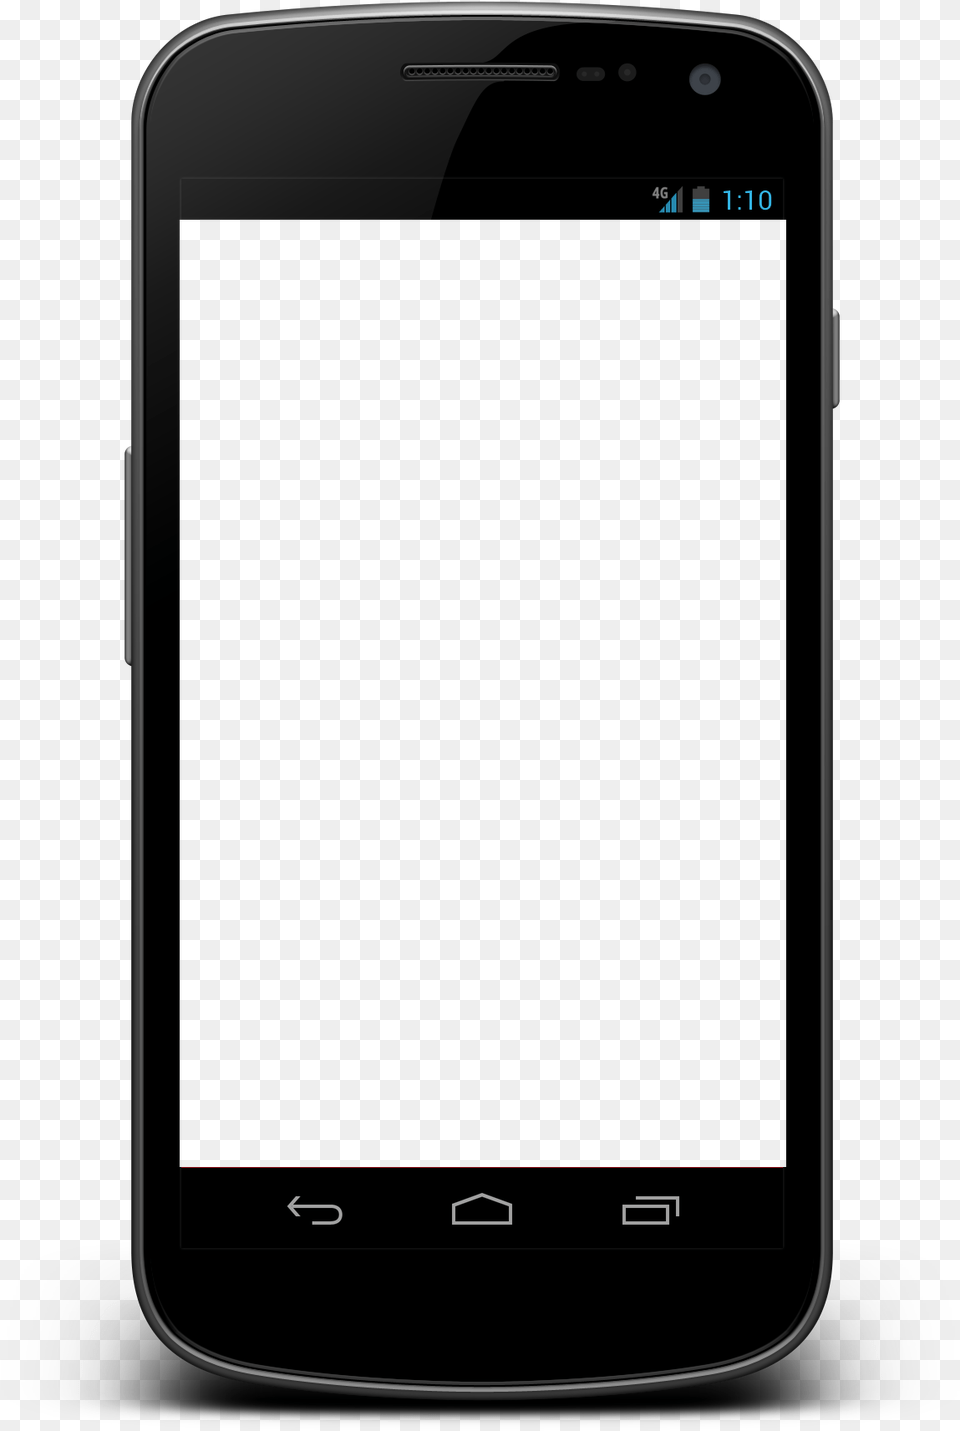 Shadow Below Images Duplicate Bottom Shadow In Photoshop, Electronics, Mobile Phone, Phone, Iphone Free Png